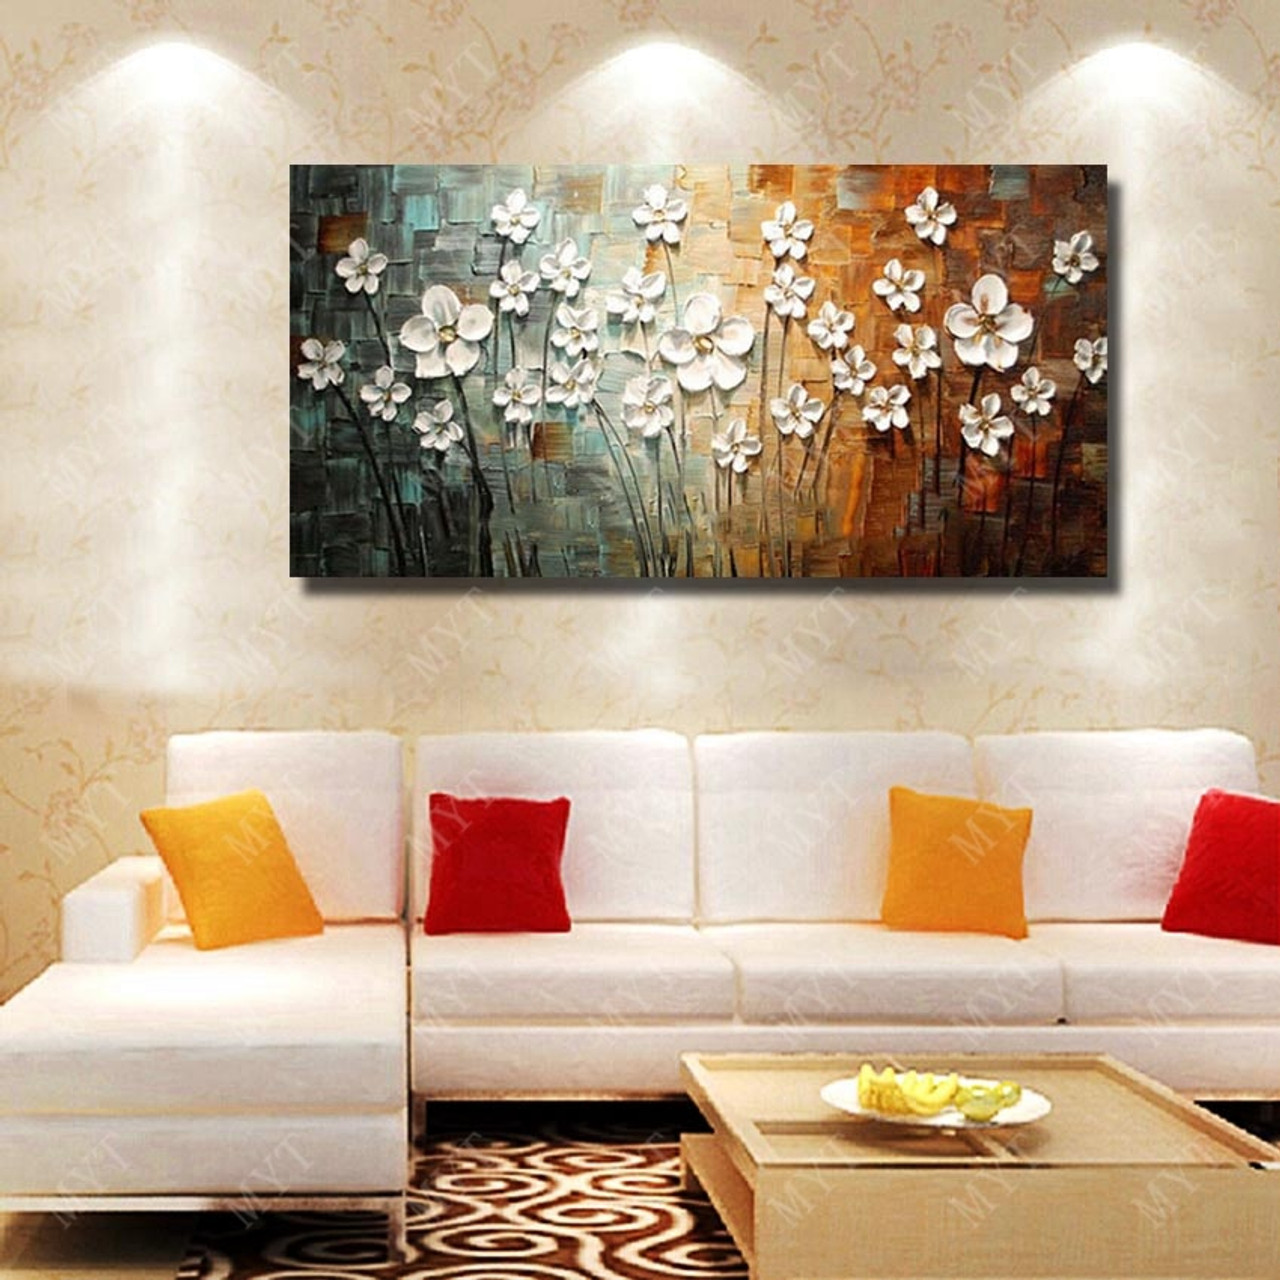 Living Room Pictures Wall Decor | house designs ideas